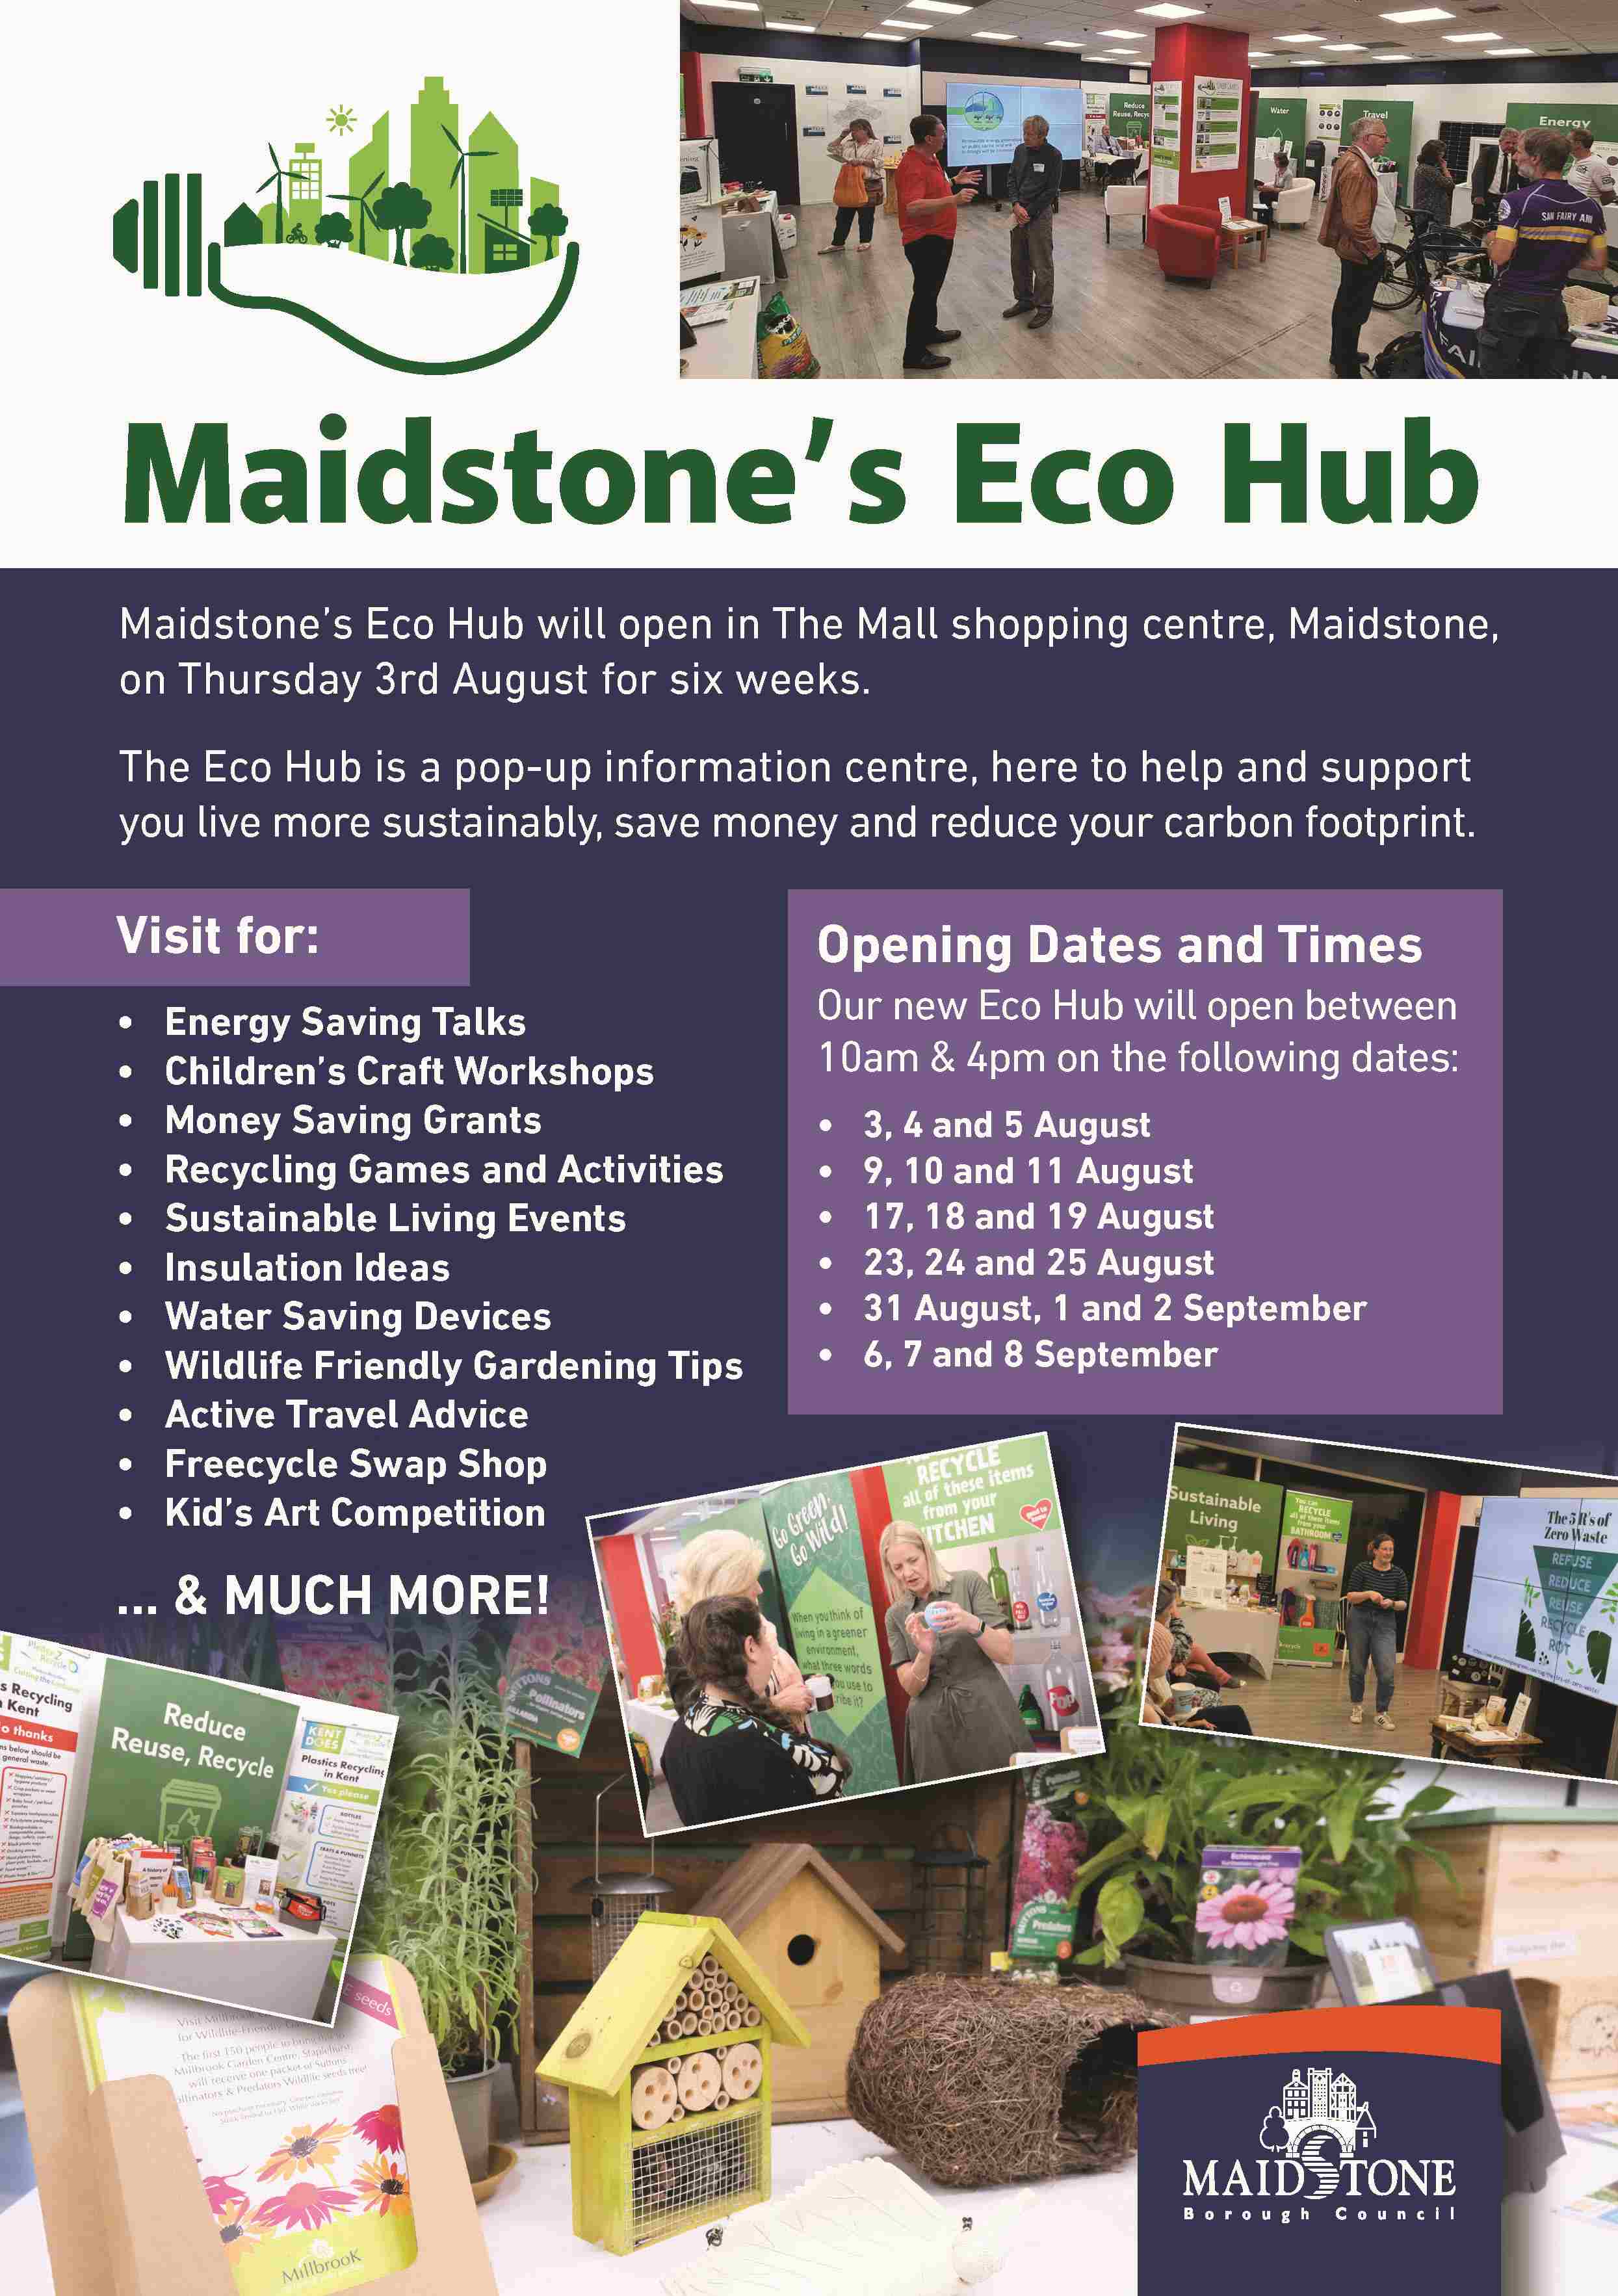 Come and visit Maidstone’s Eco Hub